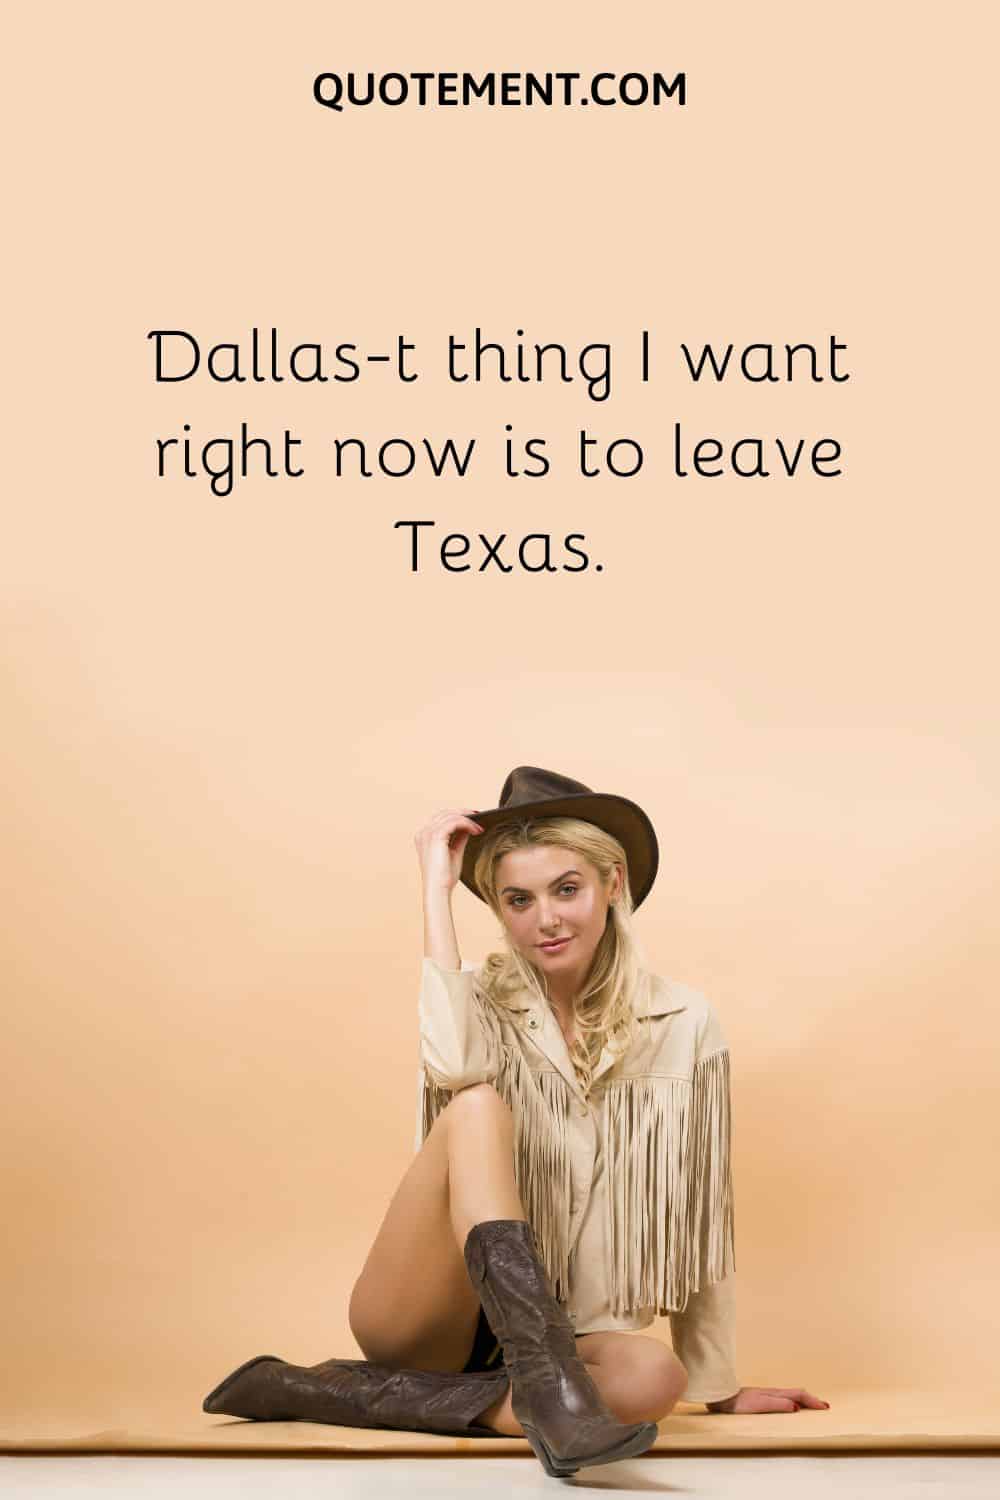 Dallas-t thing I want right now is to leave Texas.